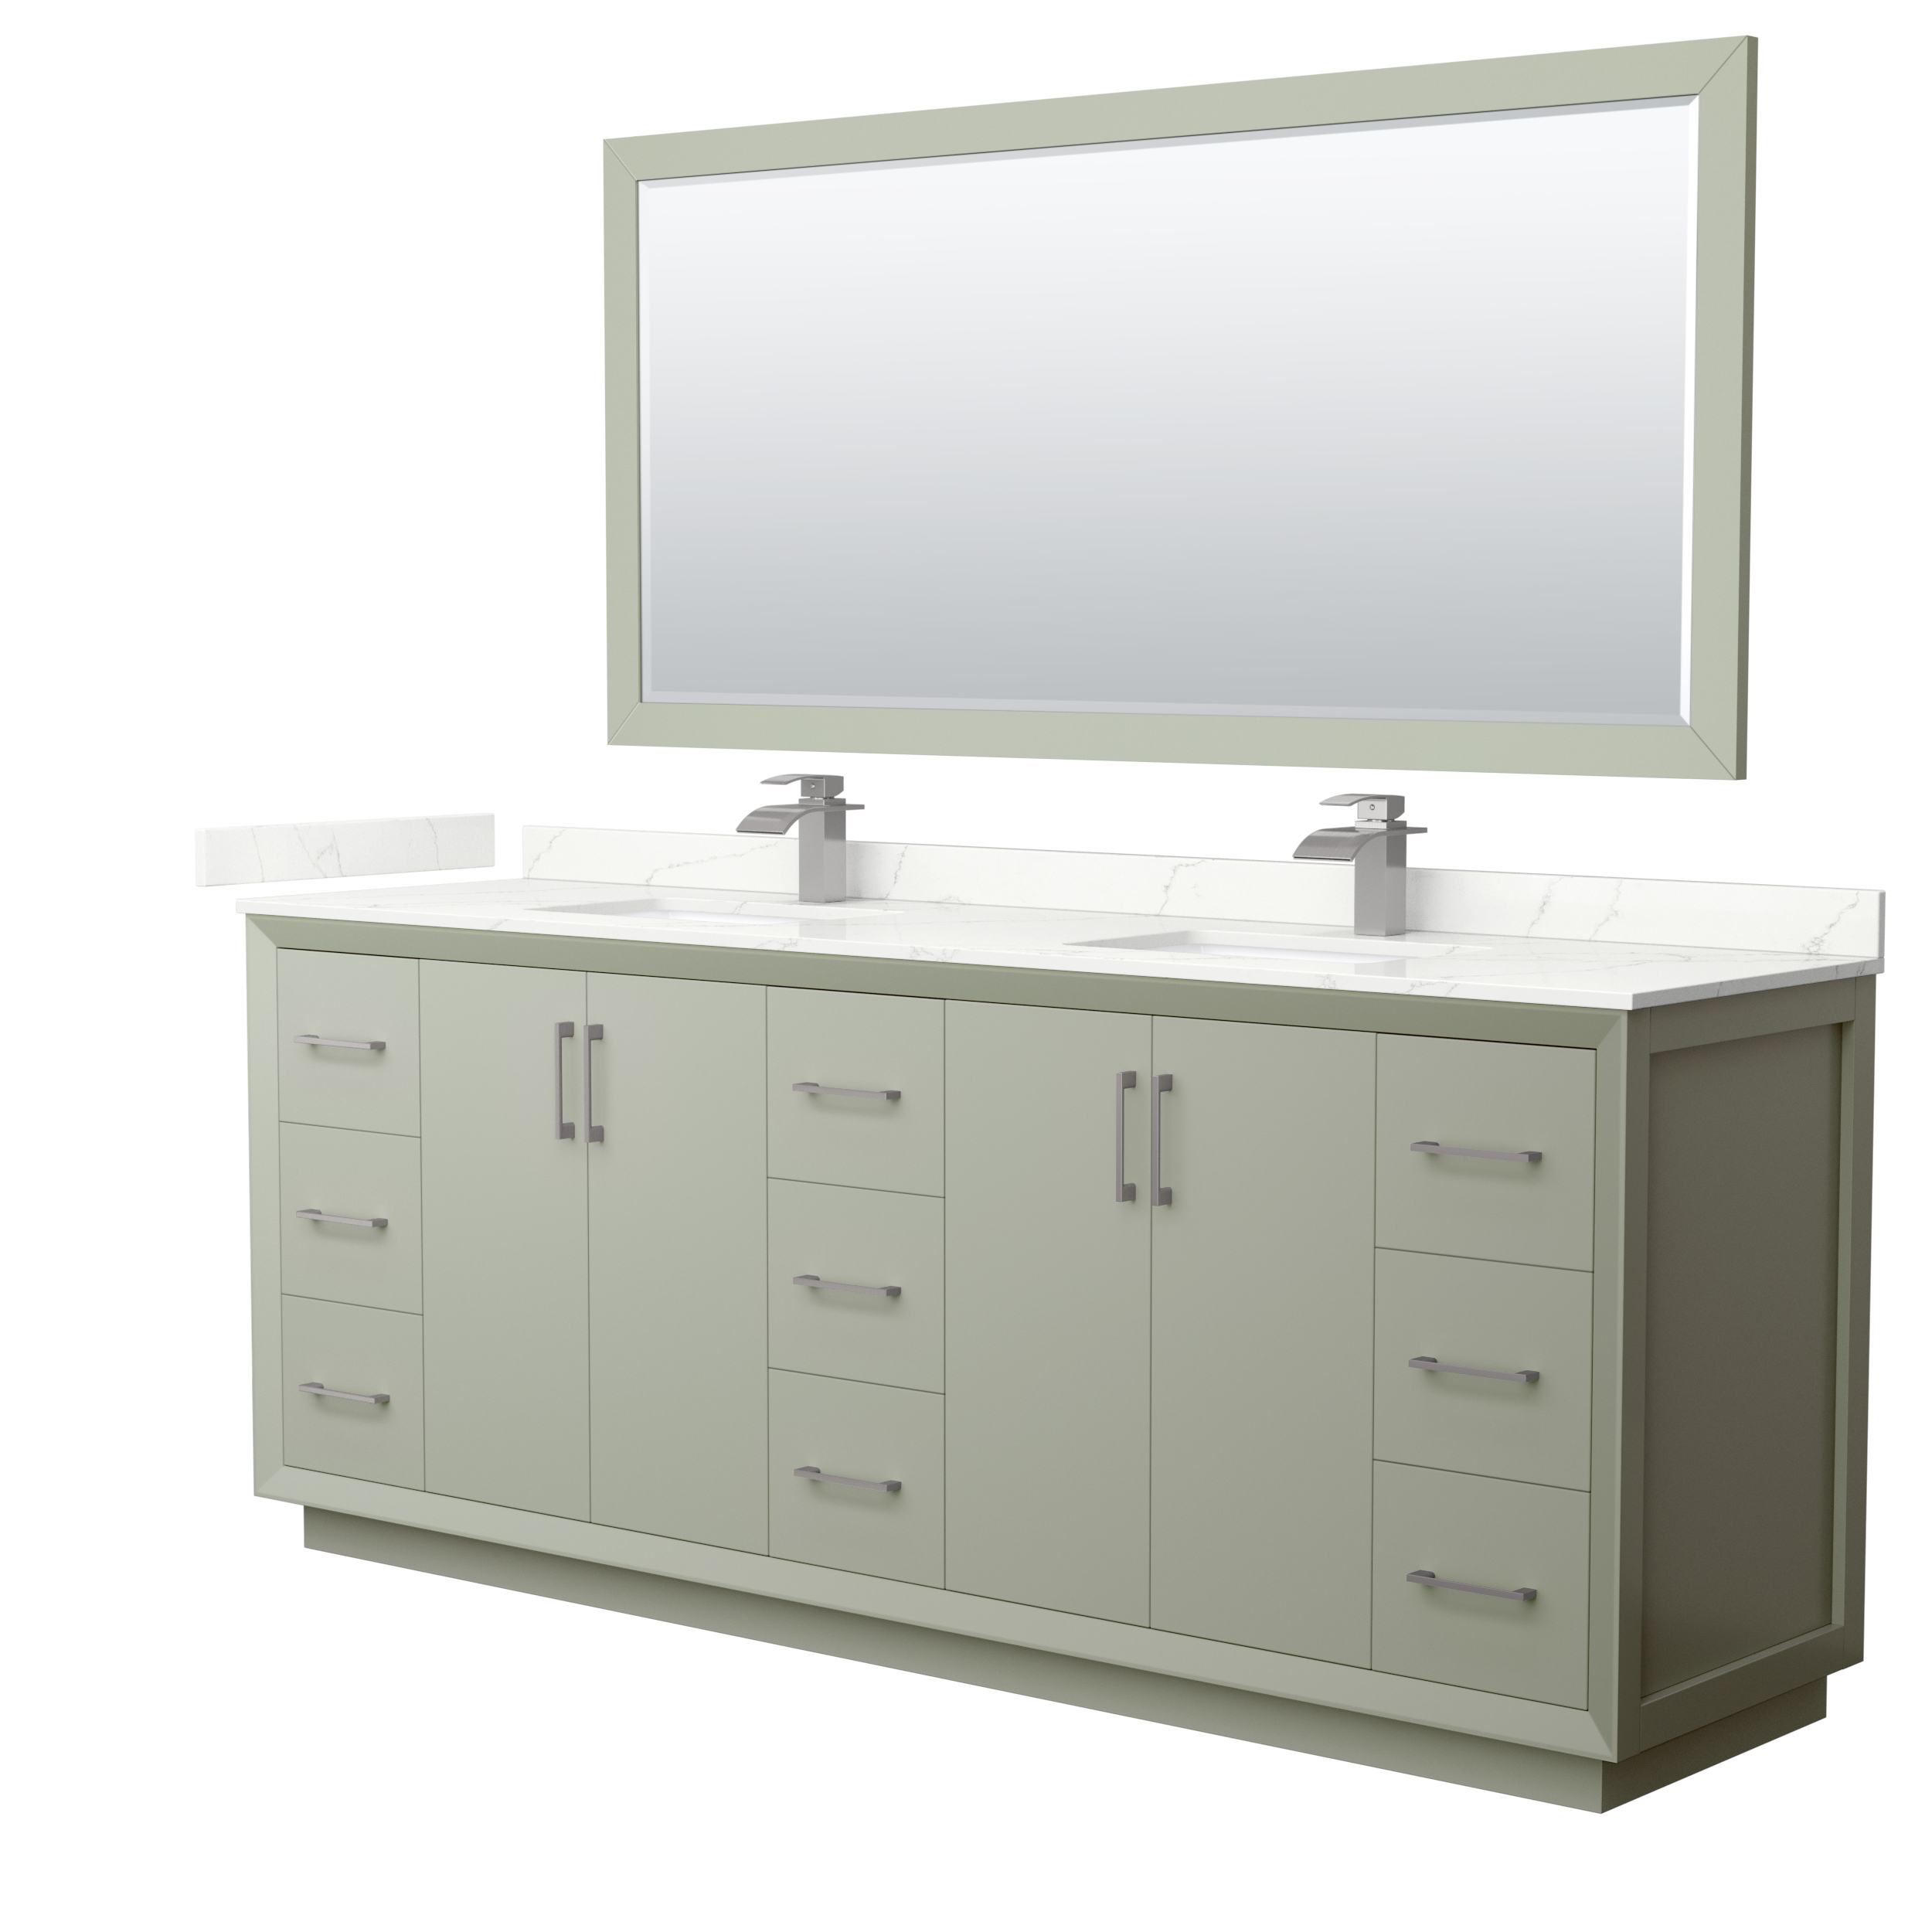 strada 84" double vanity with optional quartz or carrara marble counter - light green